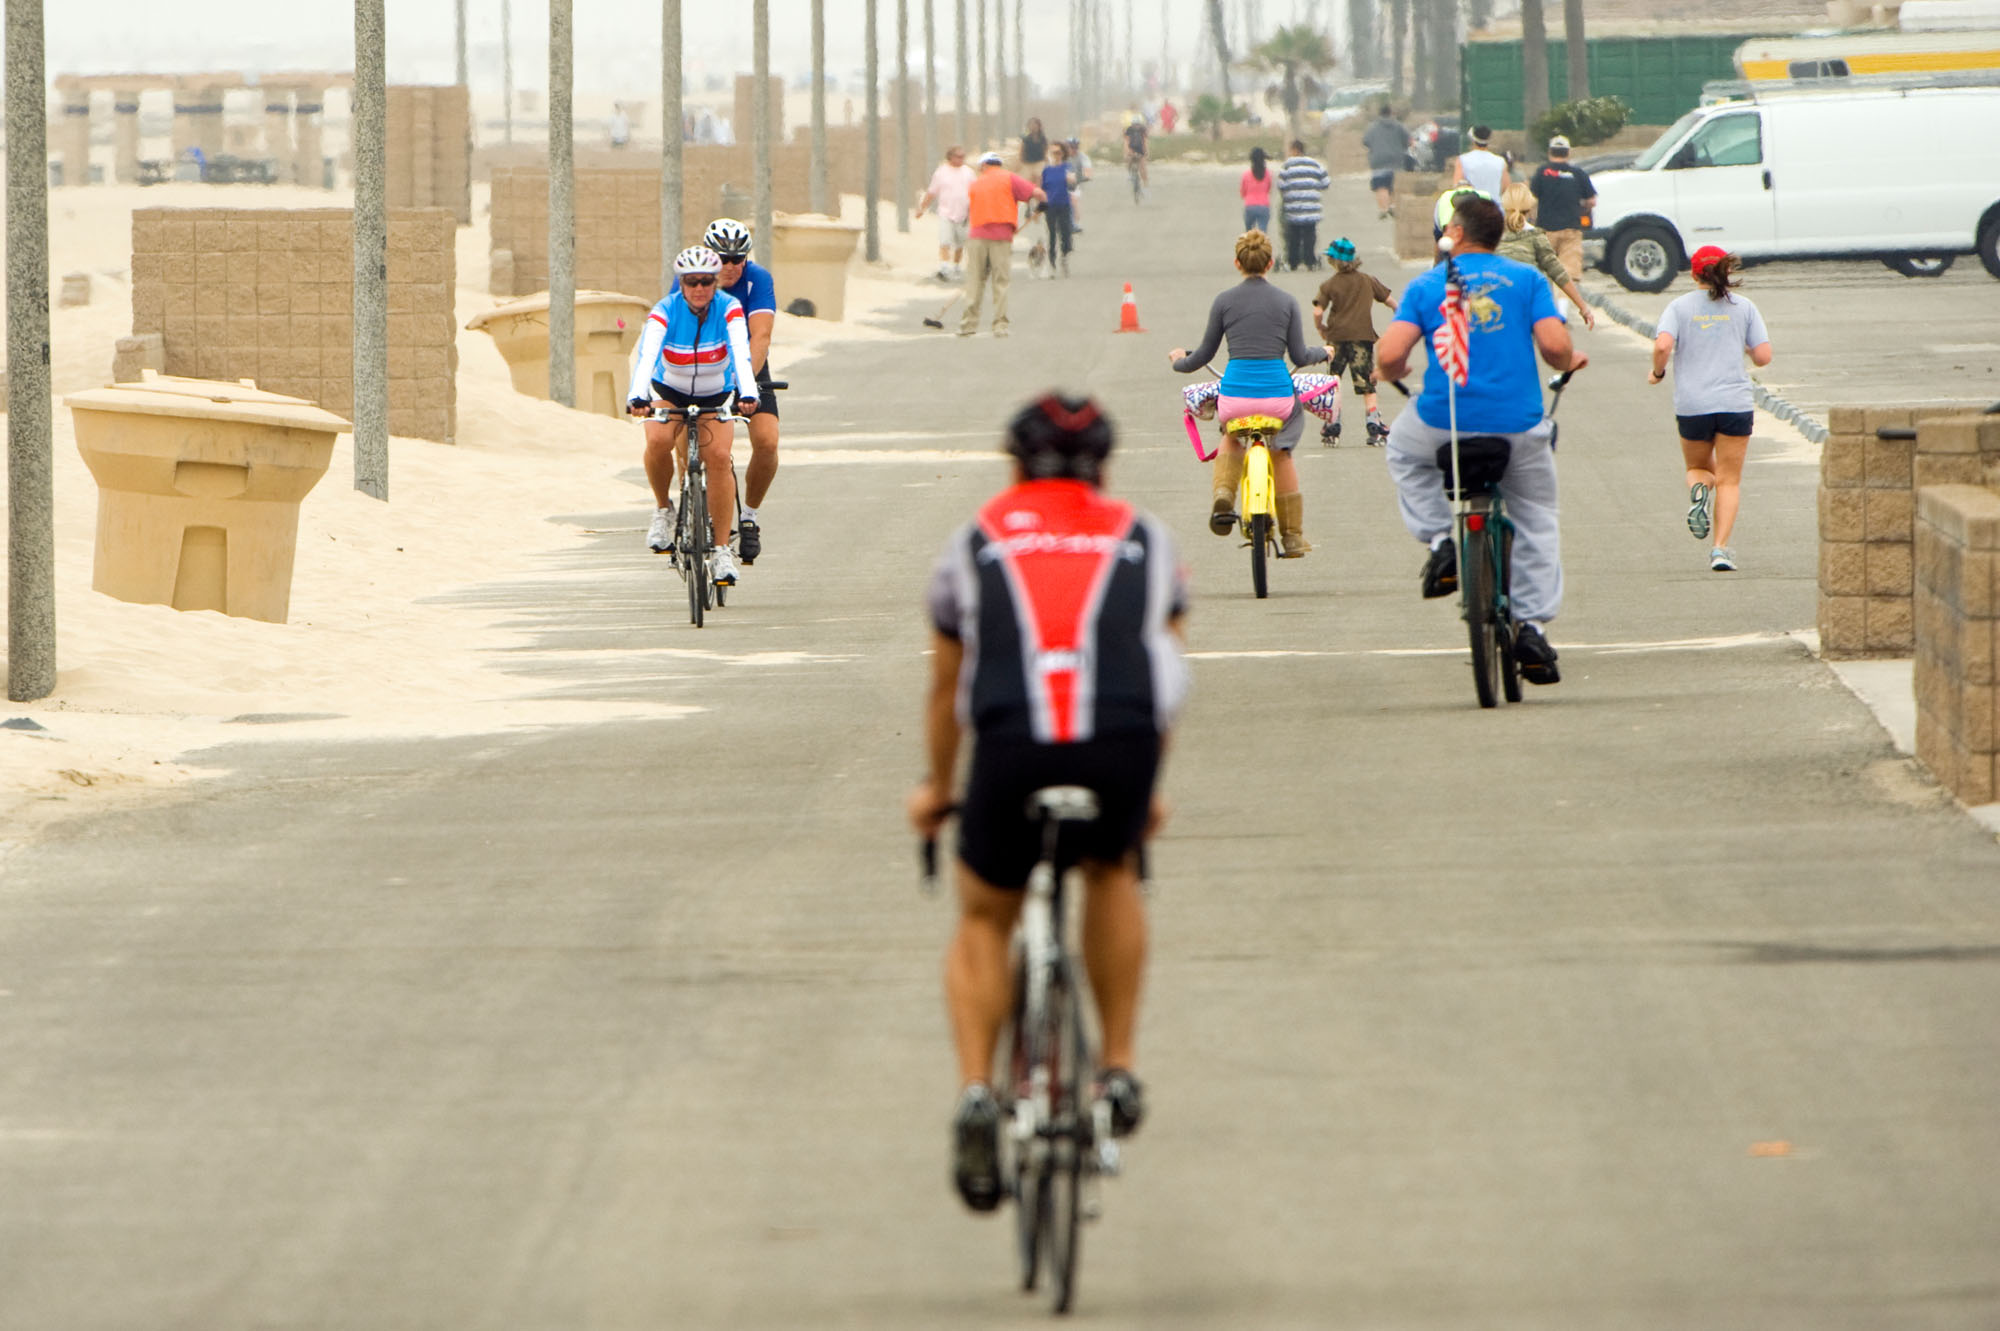 People bicycling and jogging on a road next to the beach